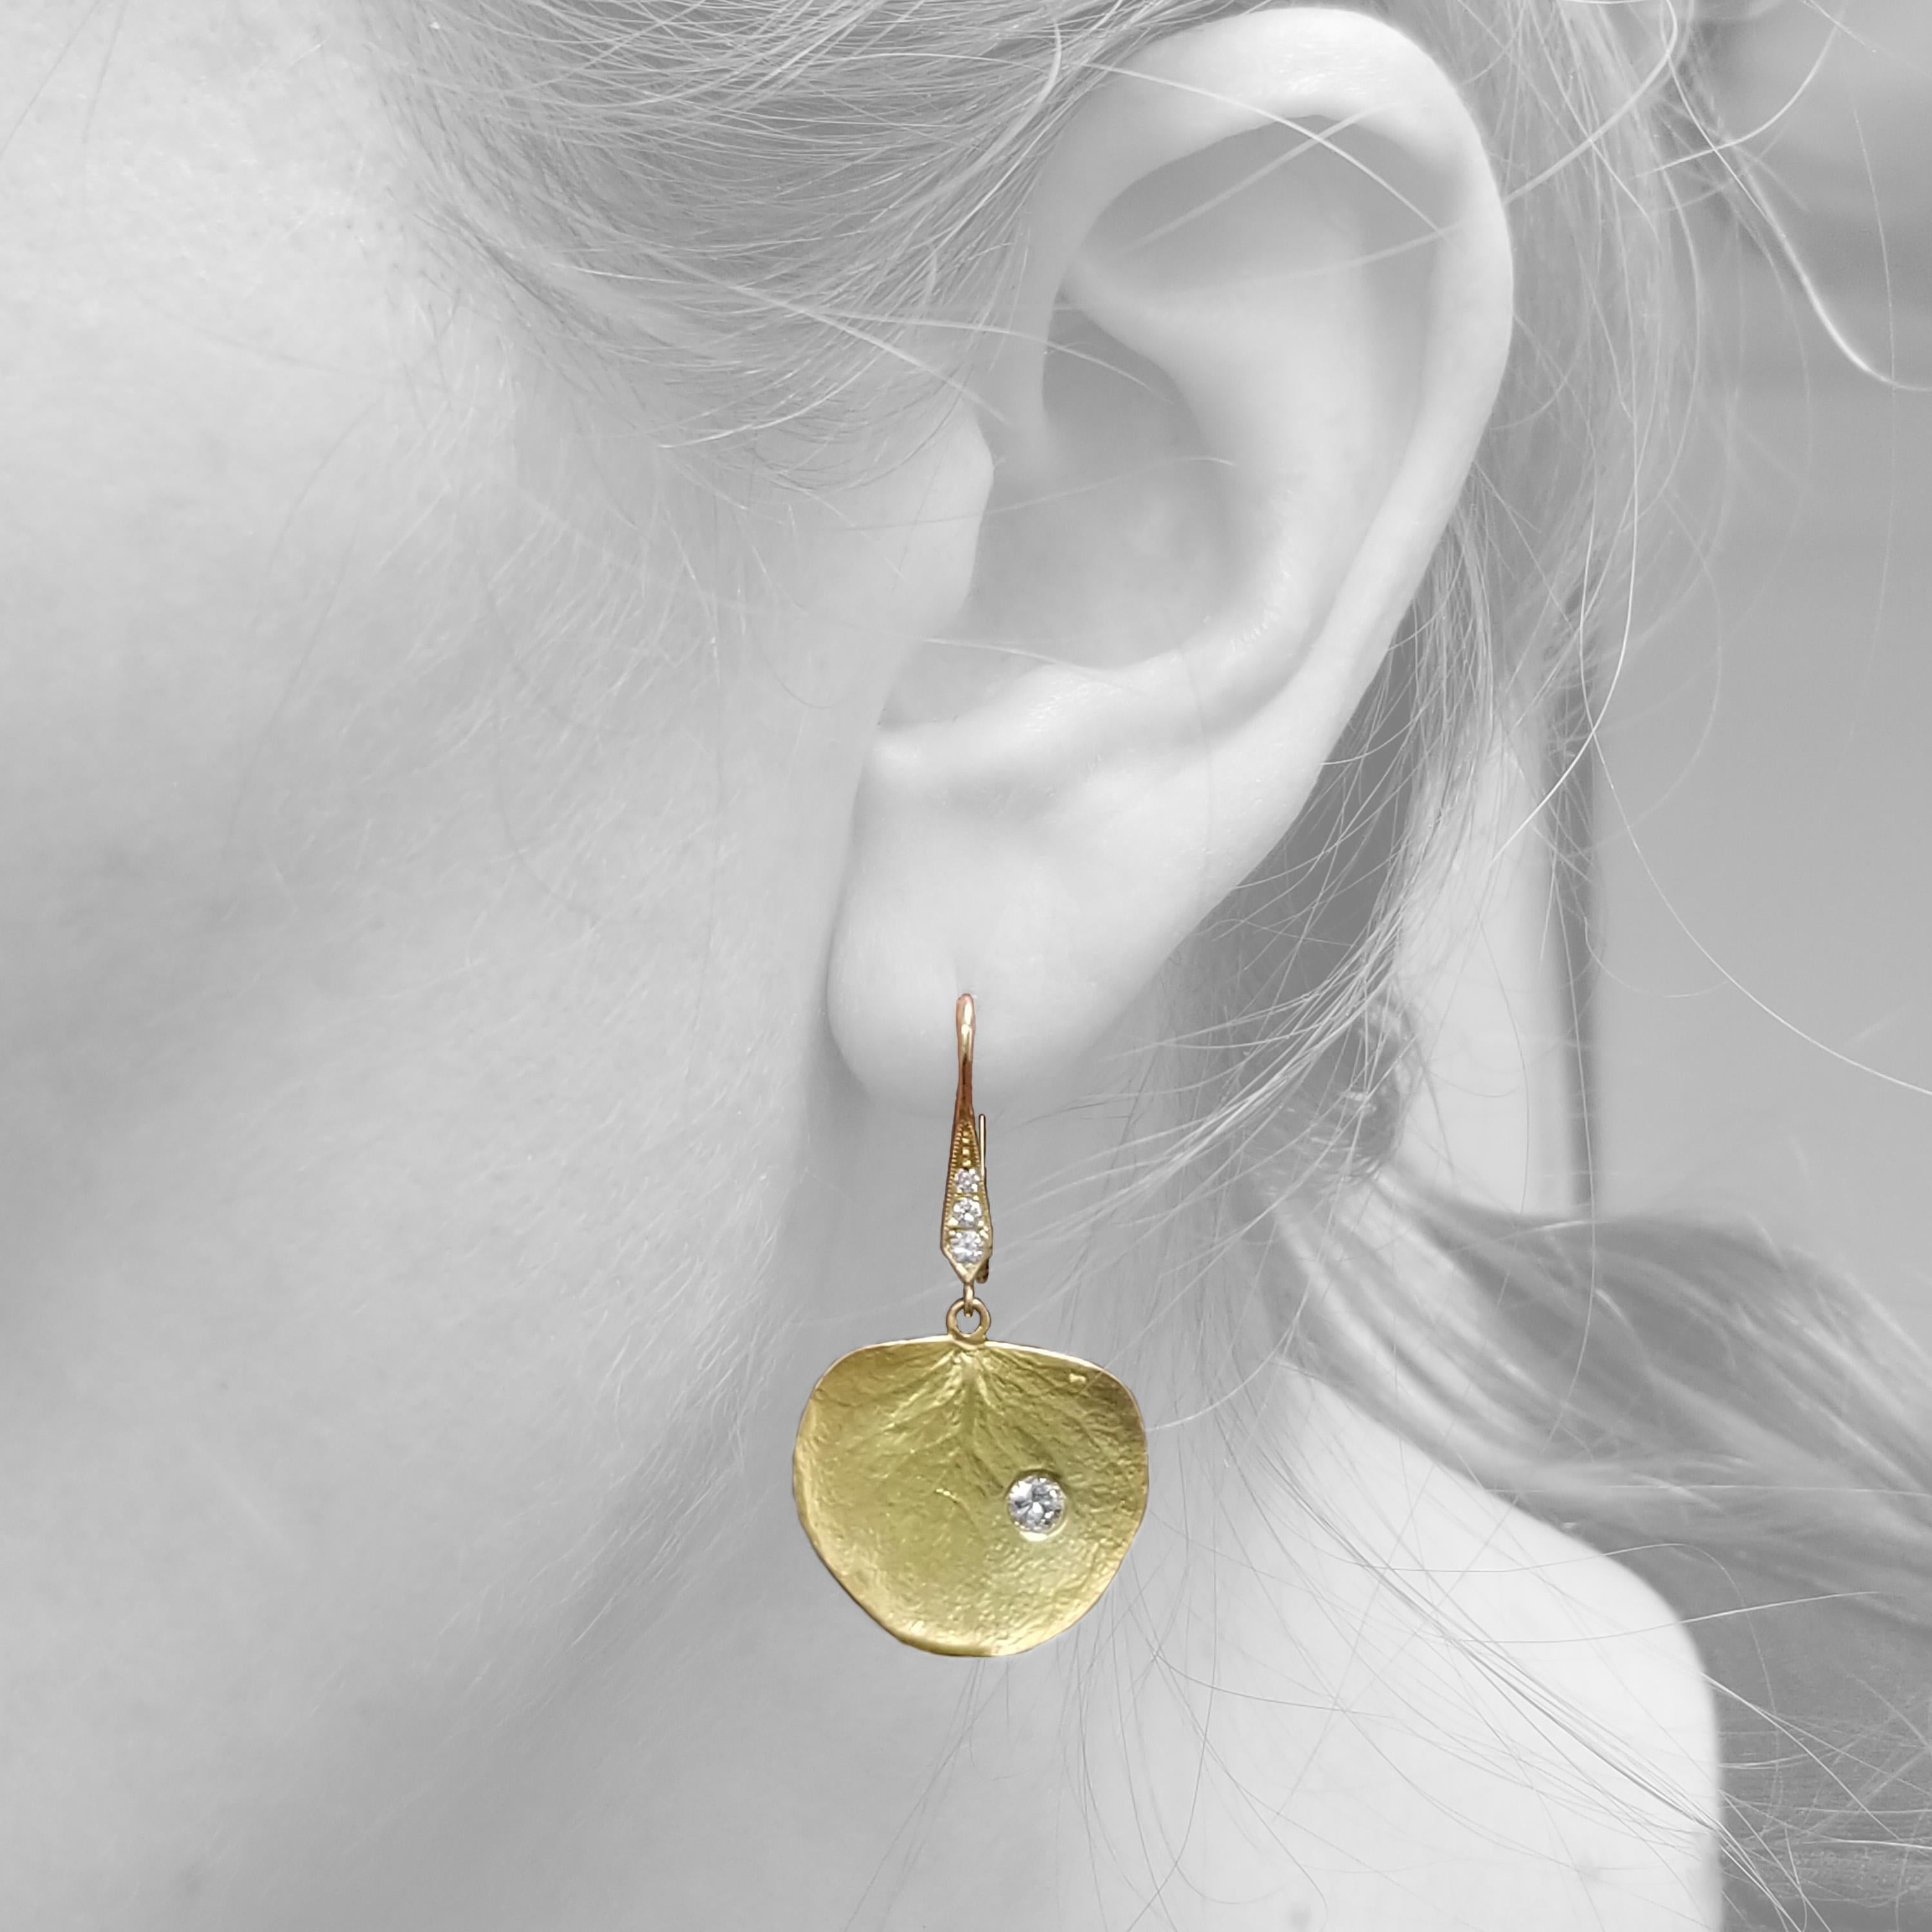 The fresh smell of eucalyptus can accompany you everywhere with these playful and effortlessly chic earrings. The finely detailed leaves are executed in such a way that the impossibly perfect veins within the leaf will catch both the light and the